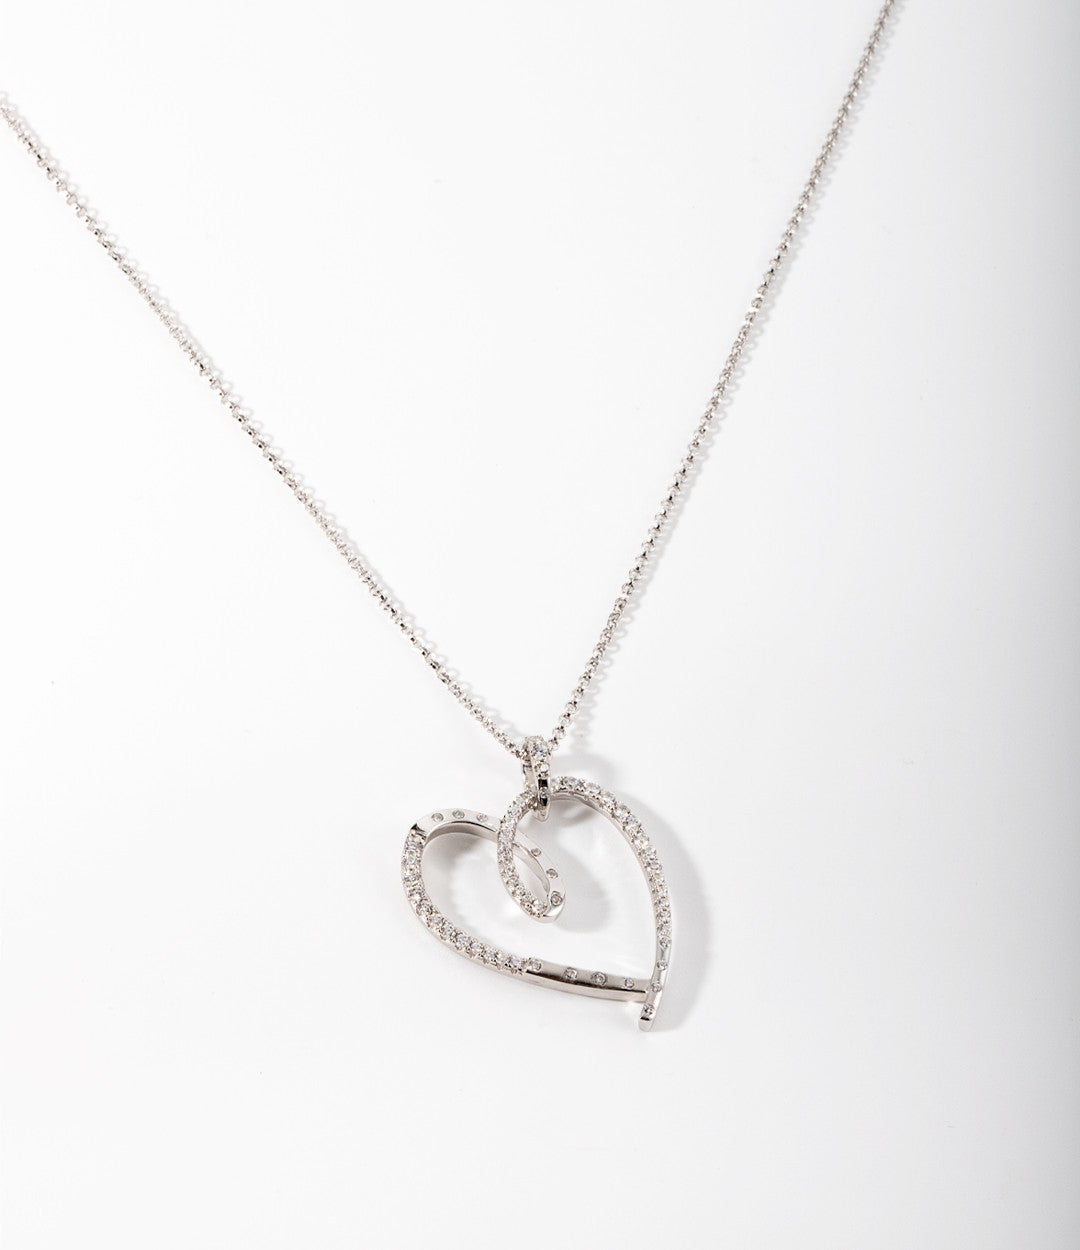 Stone Heart Imported Silver Necklace